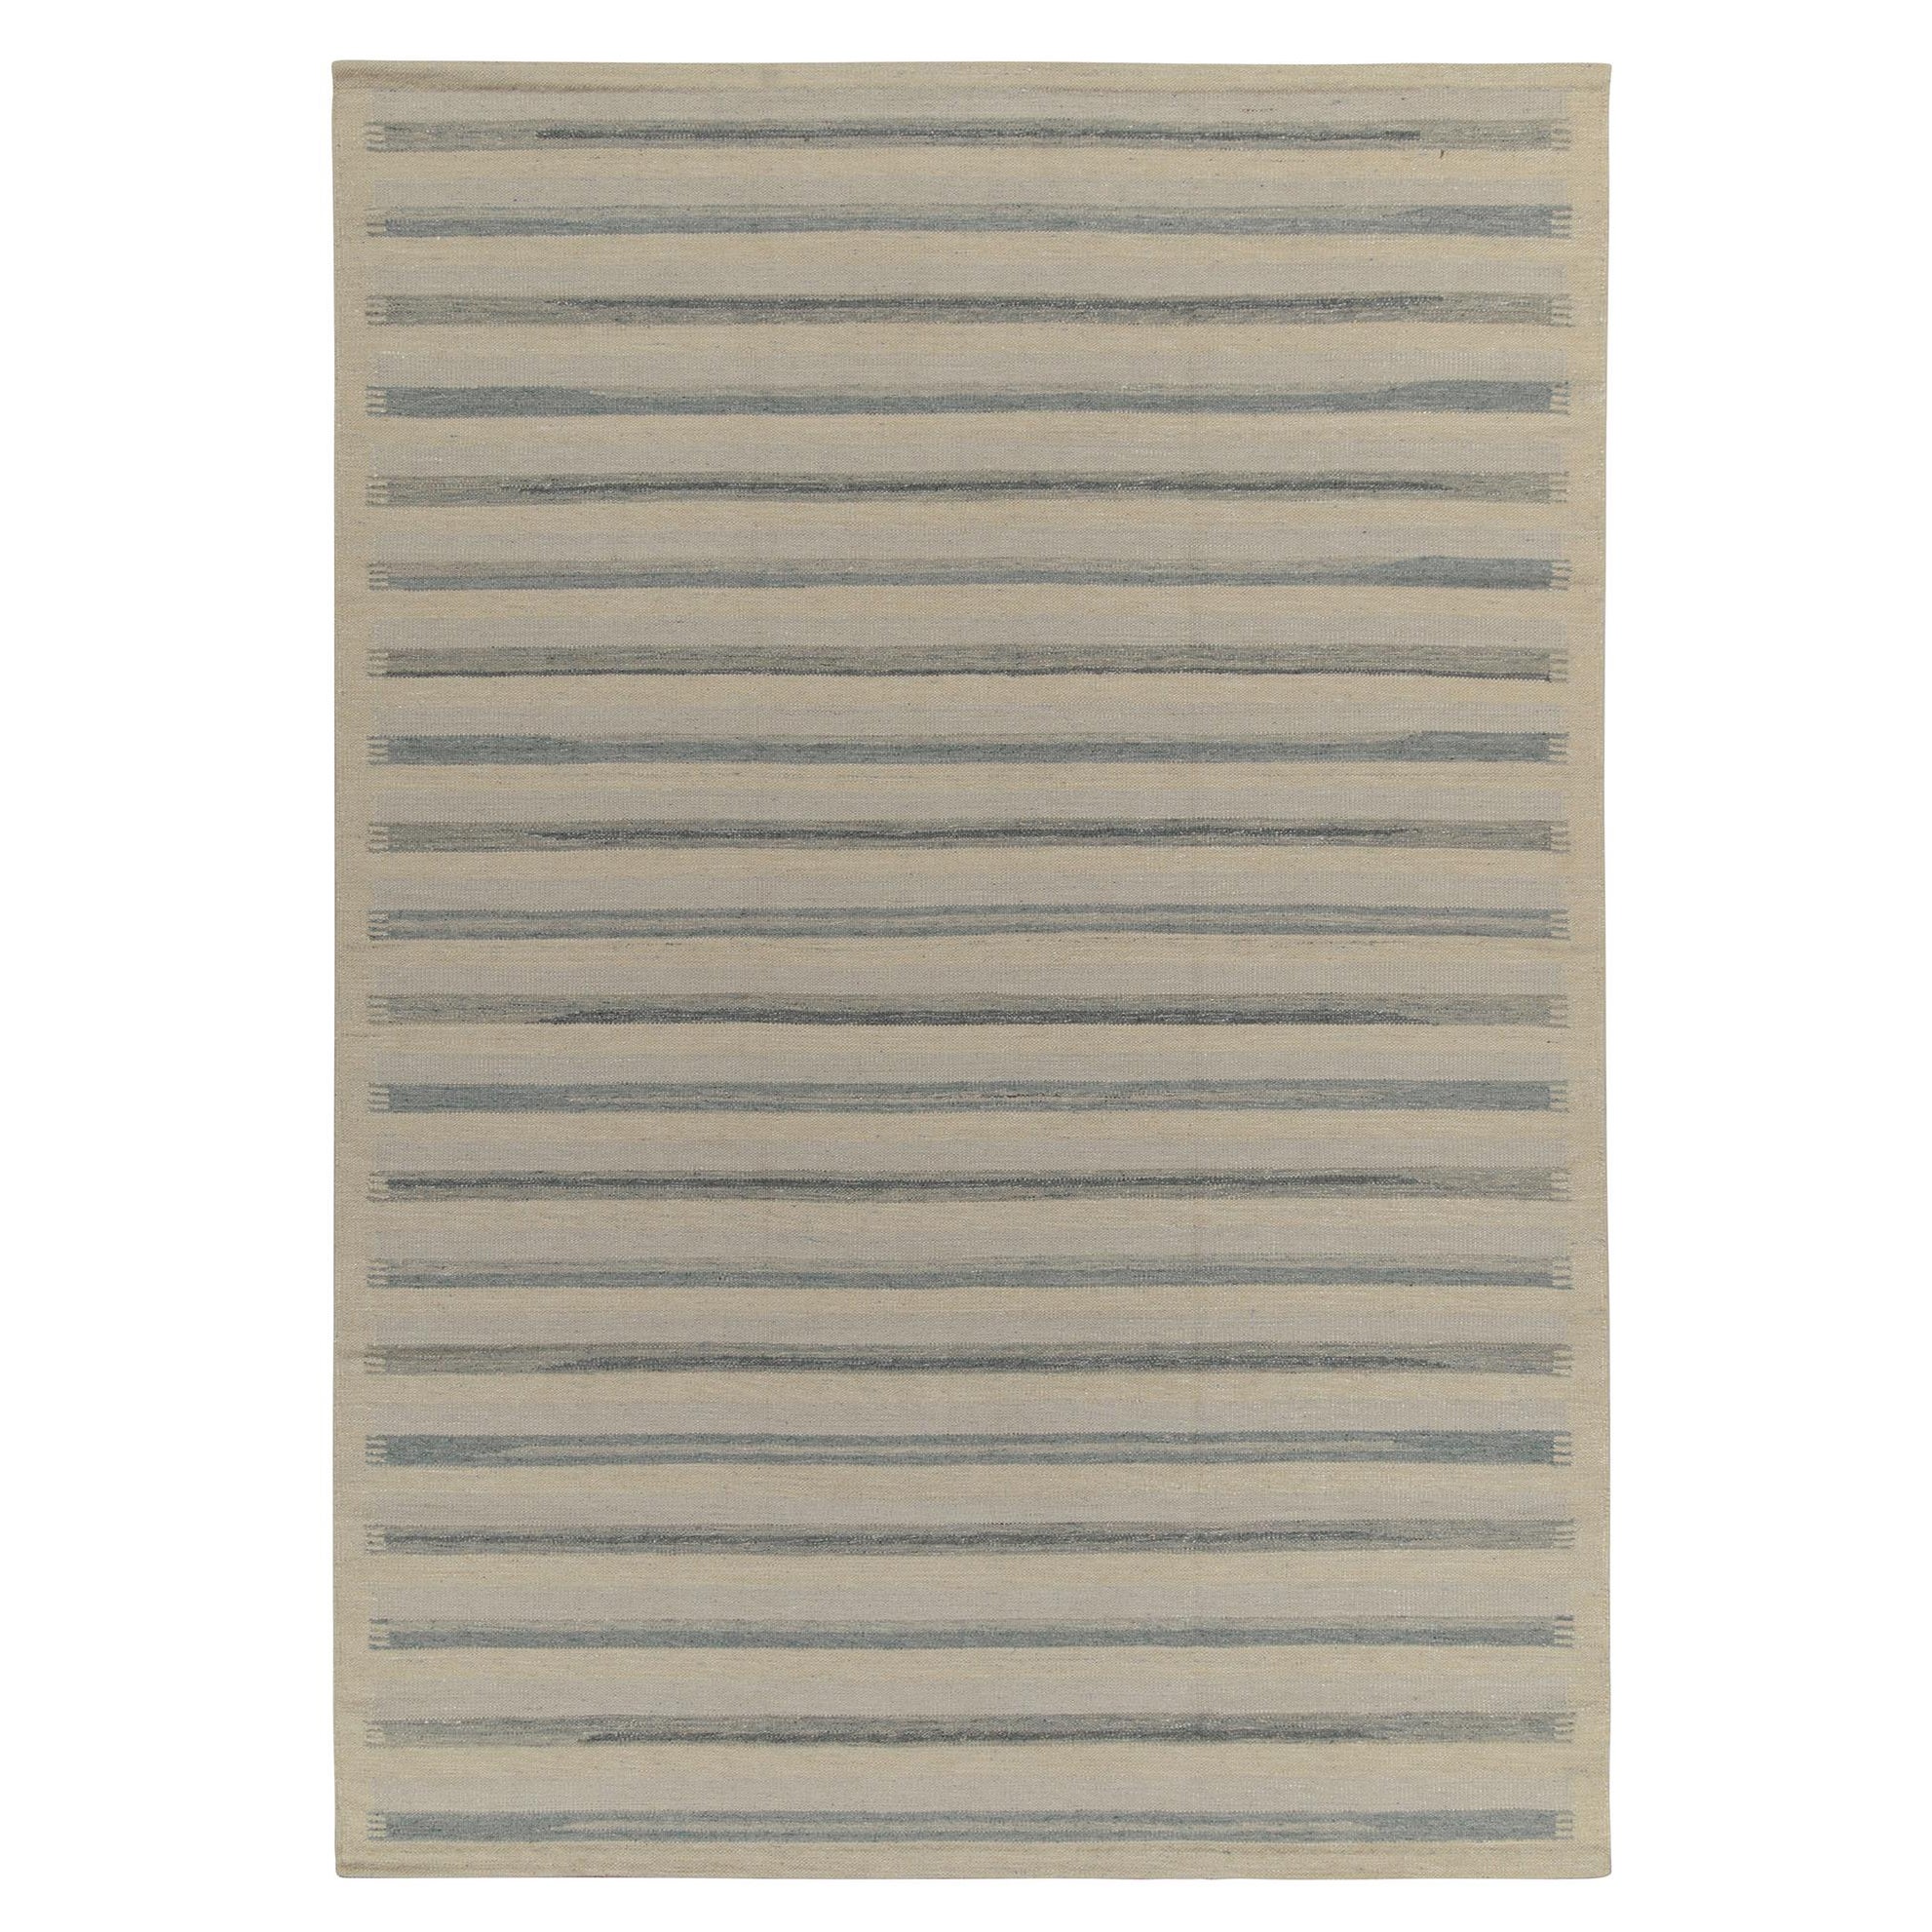 Rug & Kilim’s Scandinavian Style Kilim in Off-White, Blue and Gray Stripes